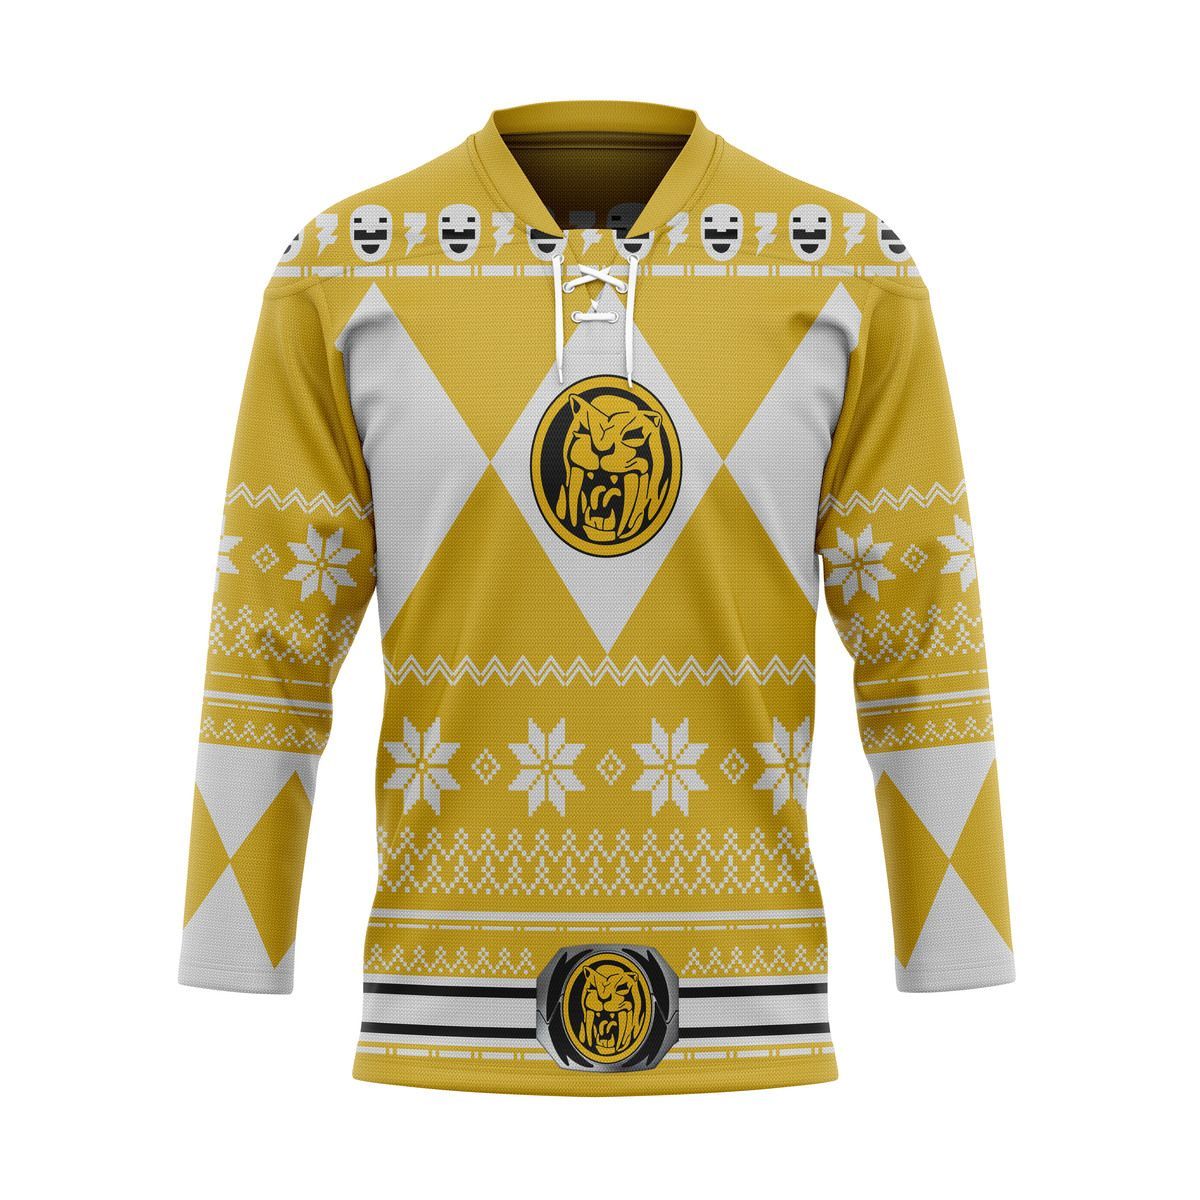 Top hot hockey jersey for NHL fans You can find out more at the bottom of the page! 51